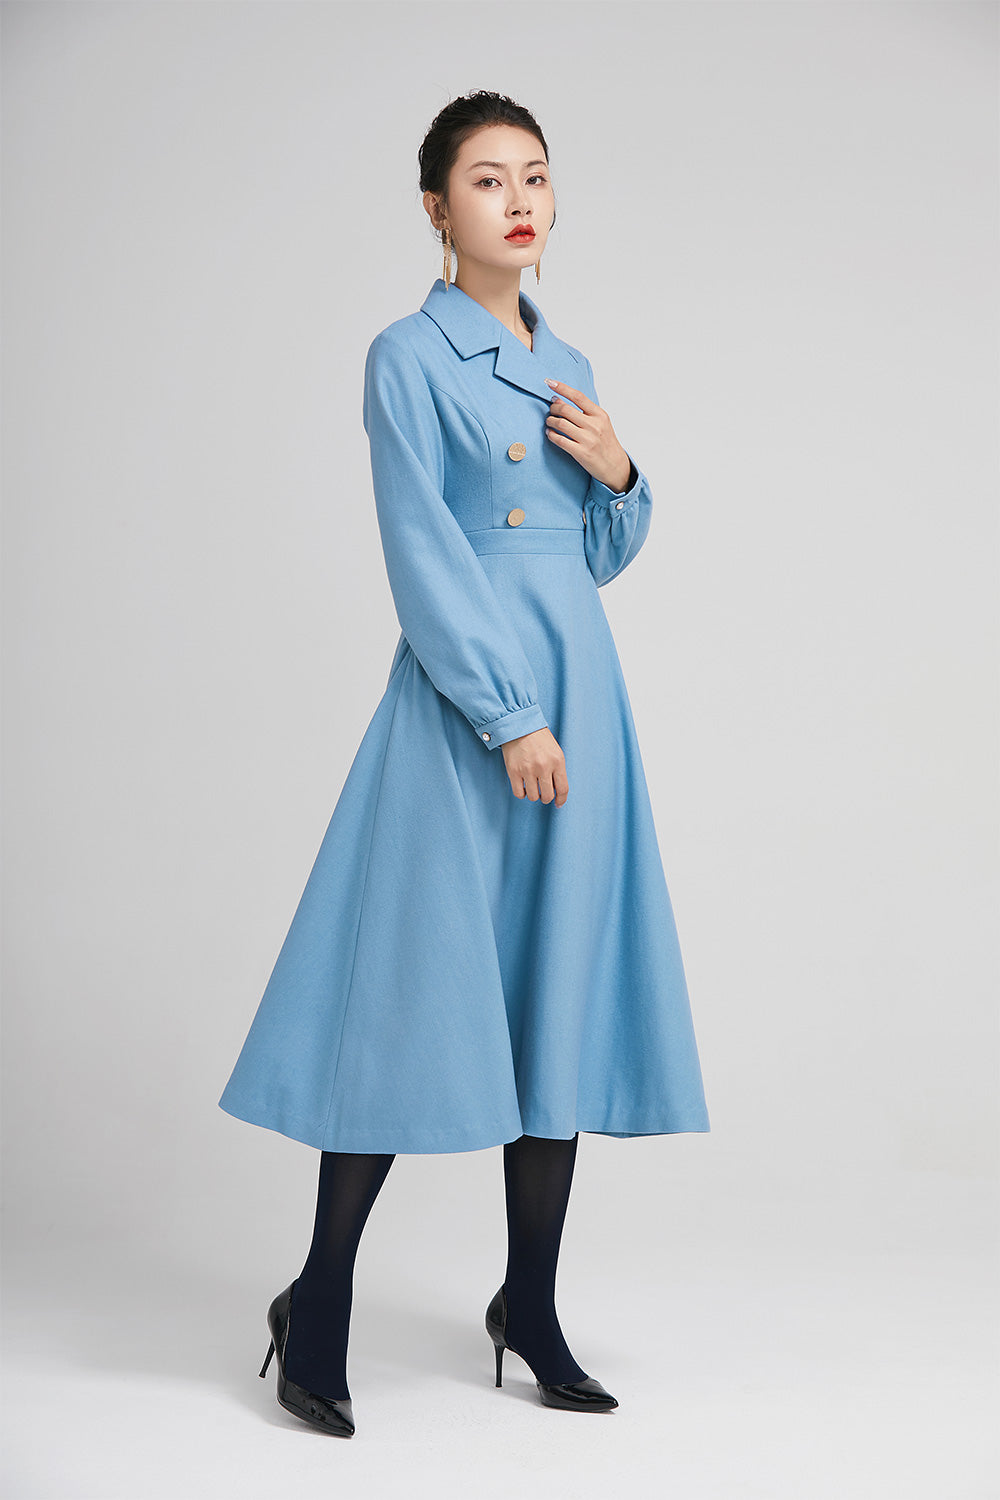 elegant blue wool winter dress with double breasted 2231 – XiaoLizi